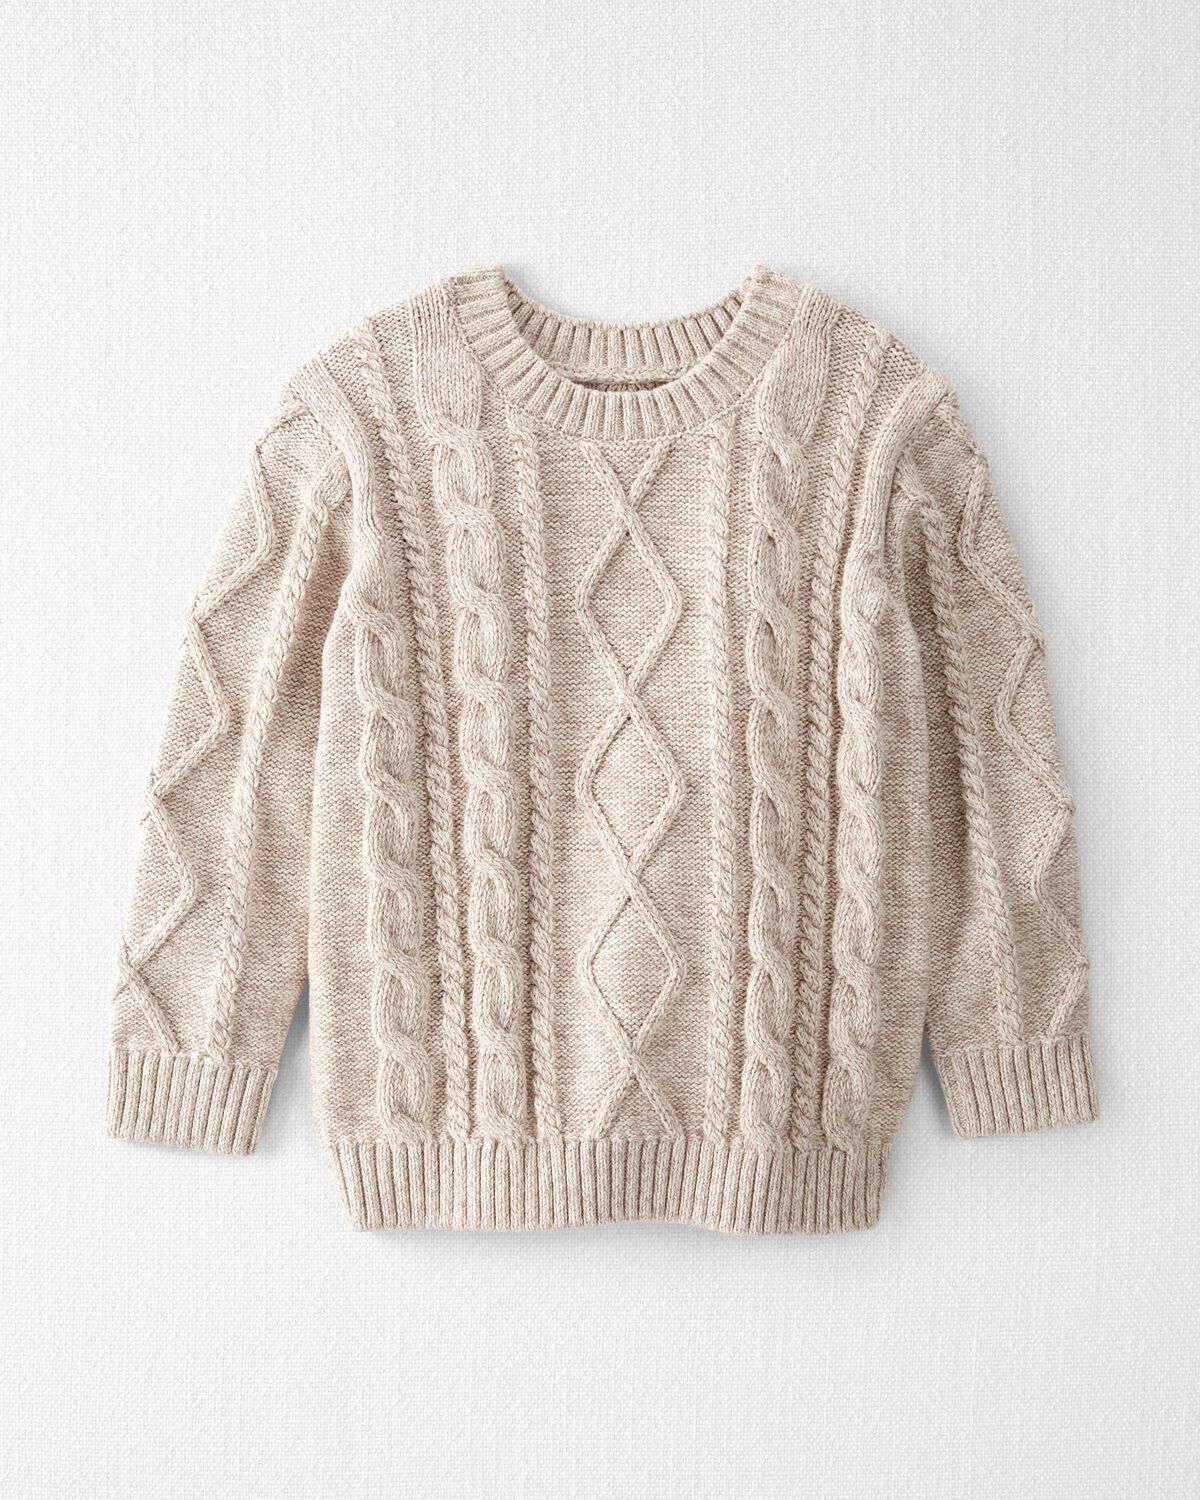 Toasted Wheat Toddler Organic Cotton Cable Knit Sweater in Cream ...